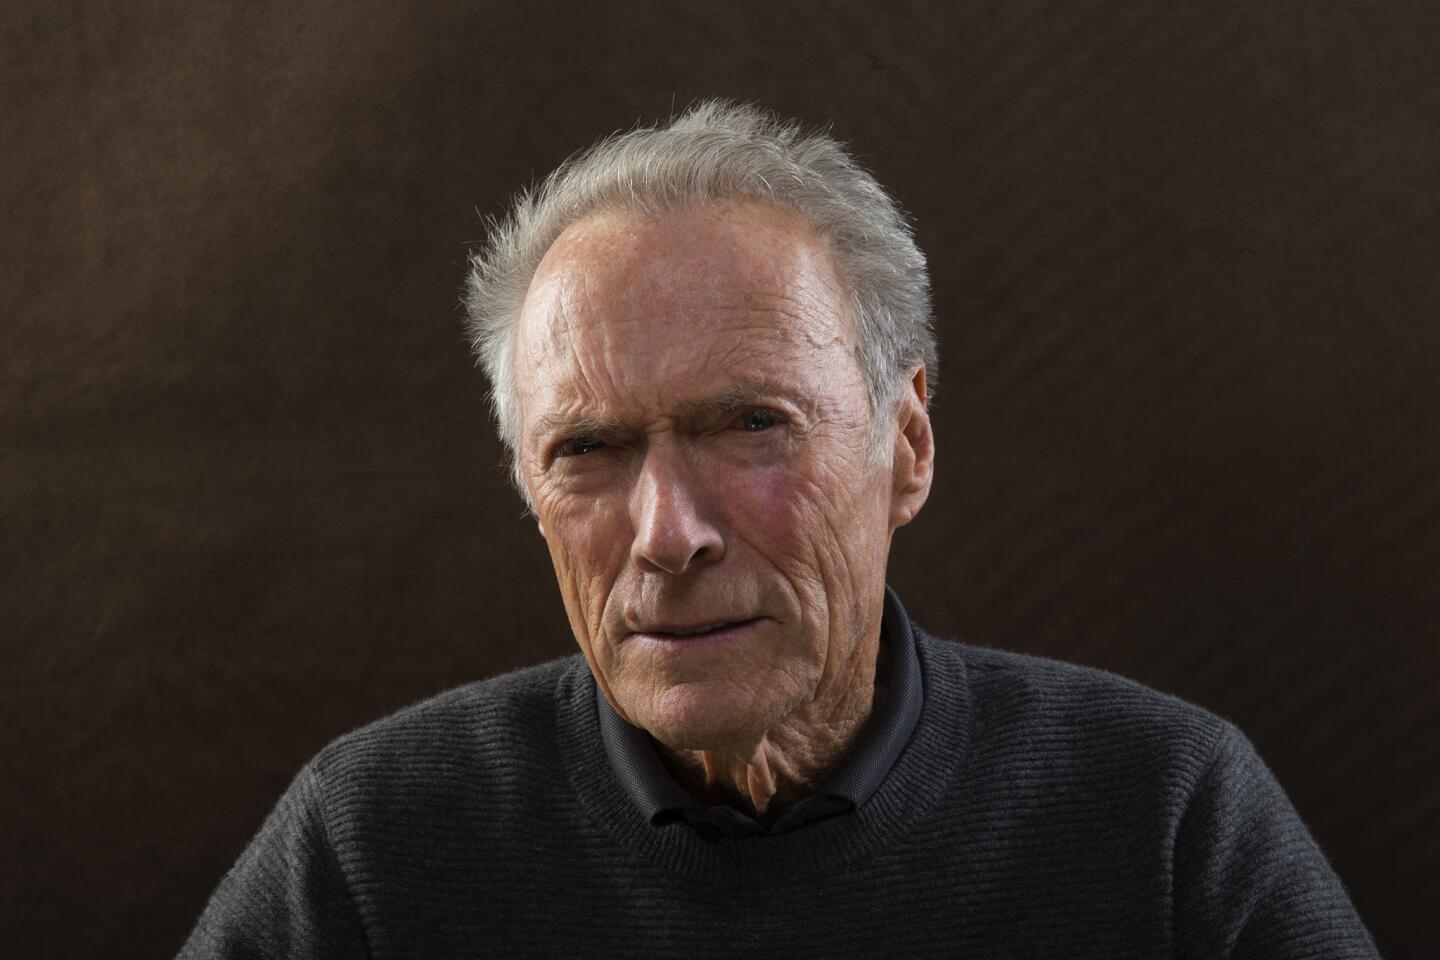 Clint Eastwood has come a long way since his stint on the classic TV western "Rawhide," with 2014's "American Sniper" being his latest work as a director. In the decades between, he's left his mark on dozens of films in one of Hollywood's most storied careers. Here are some highlights.